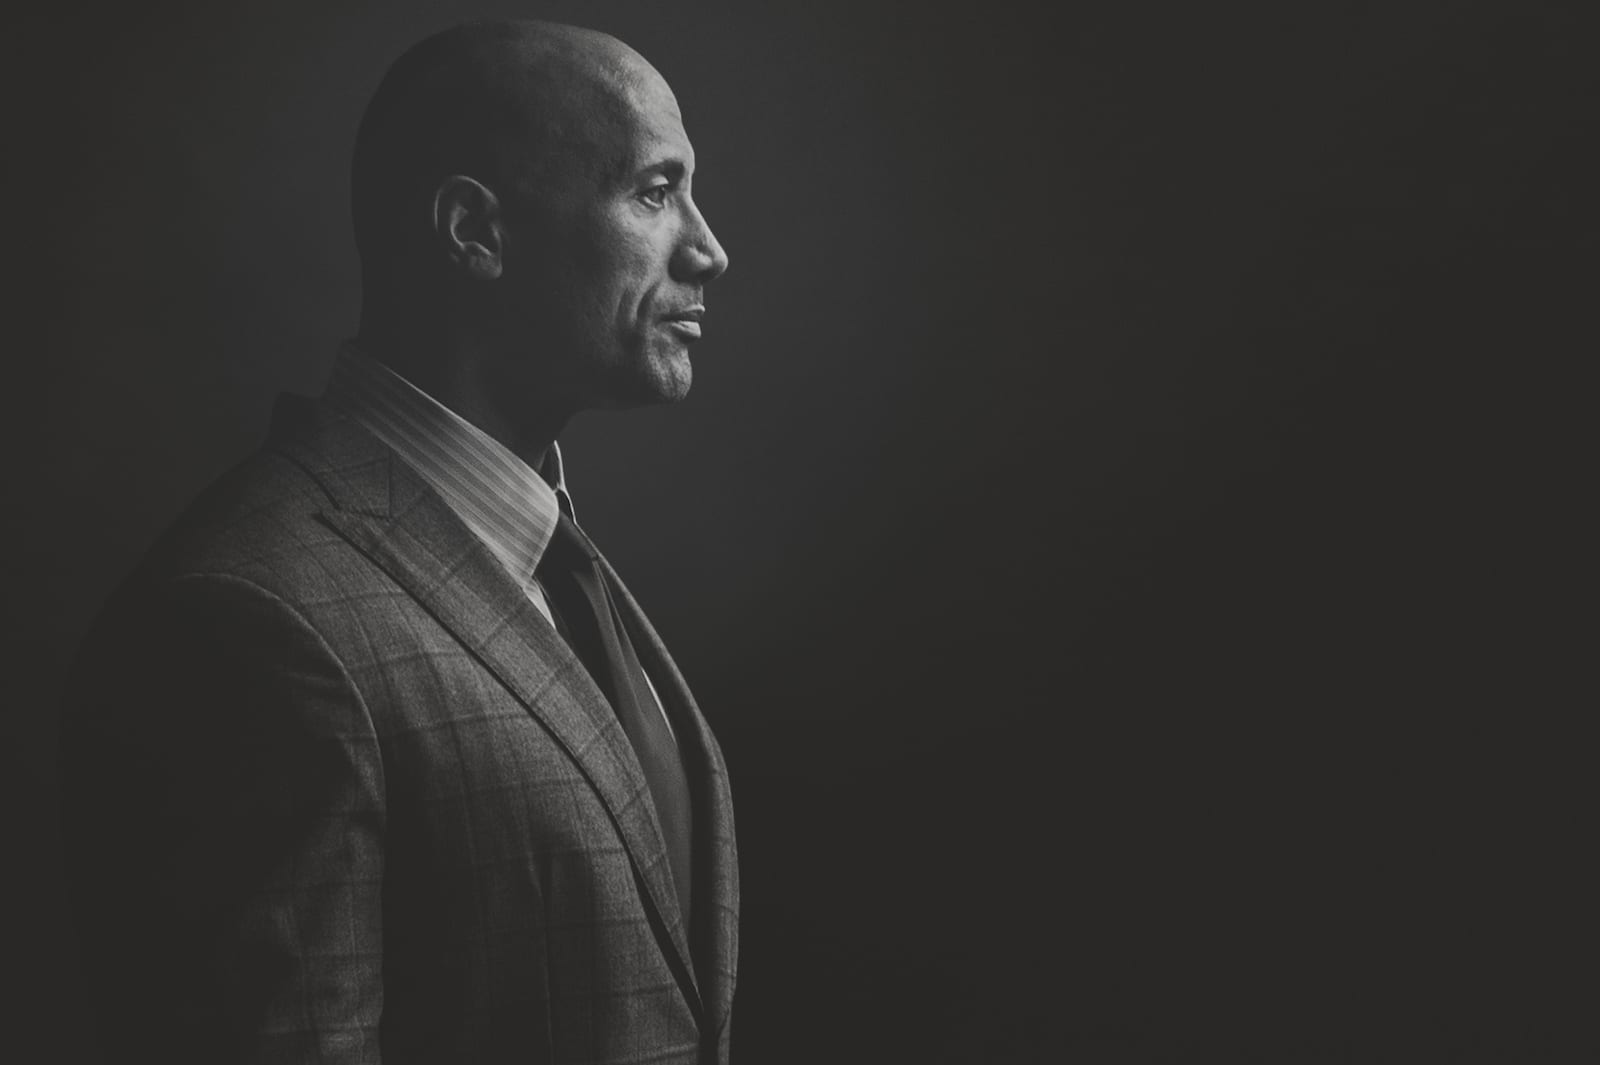 Dwayne "The Rock" Johnson with Fortune Magazine